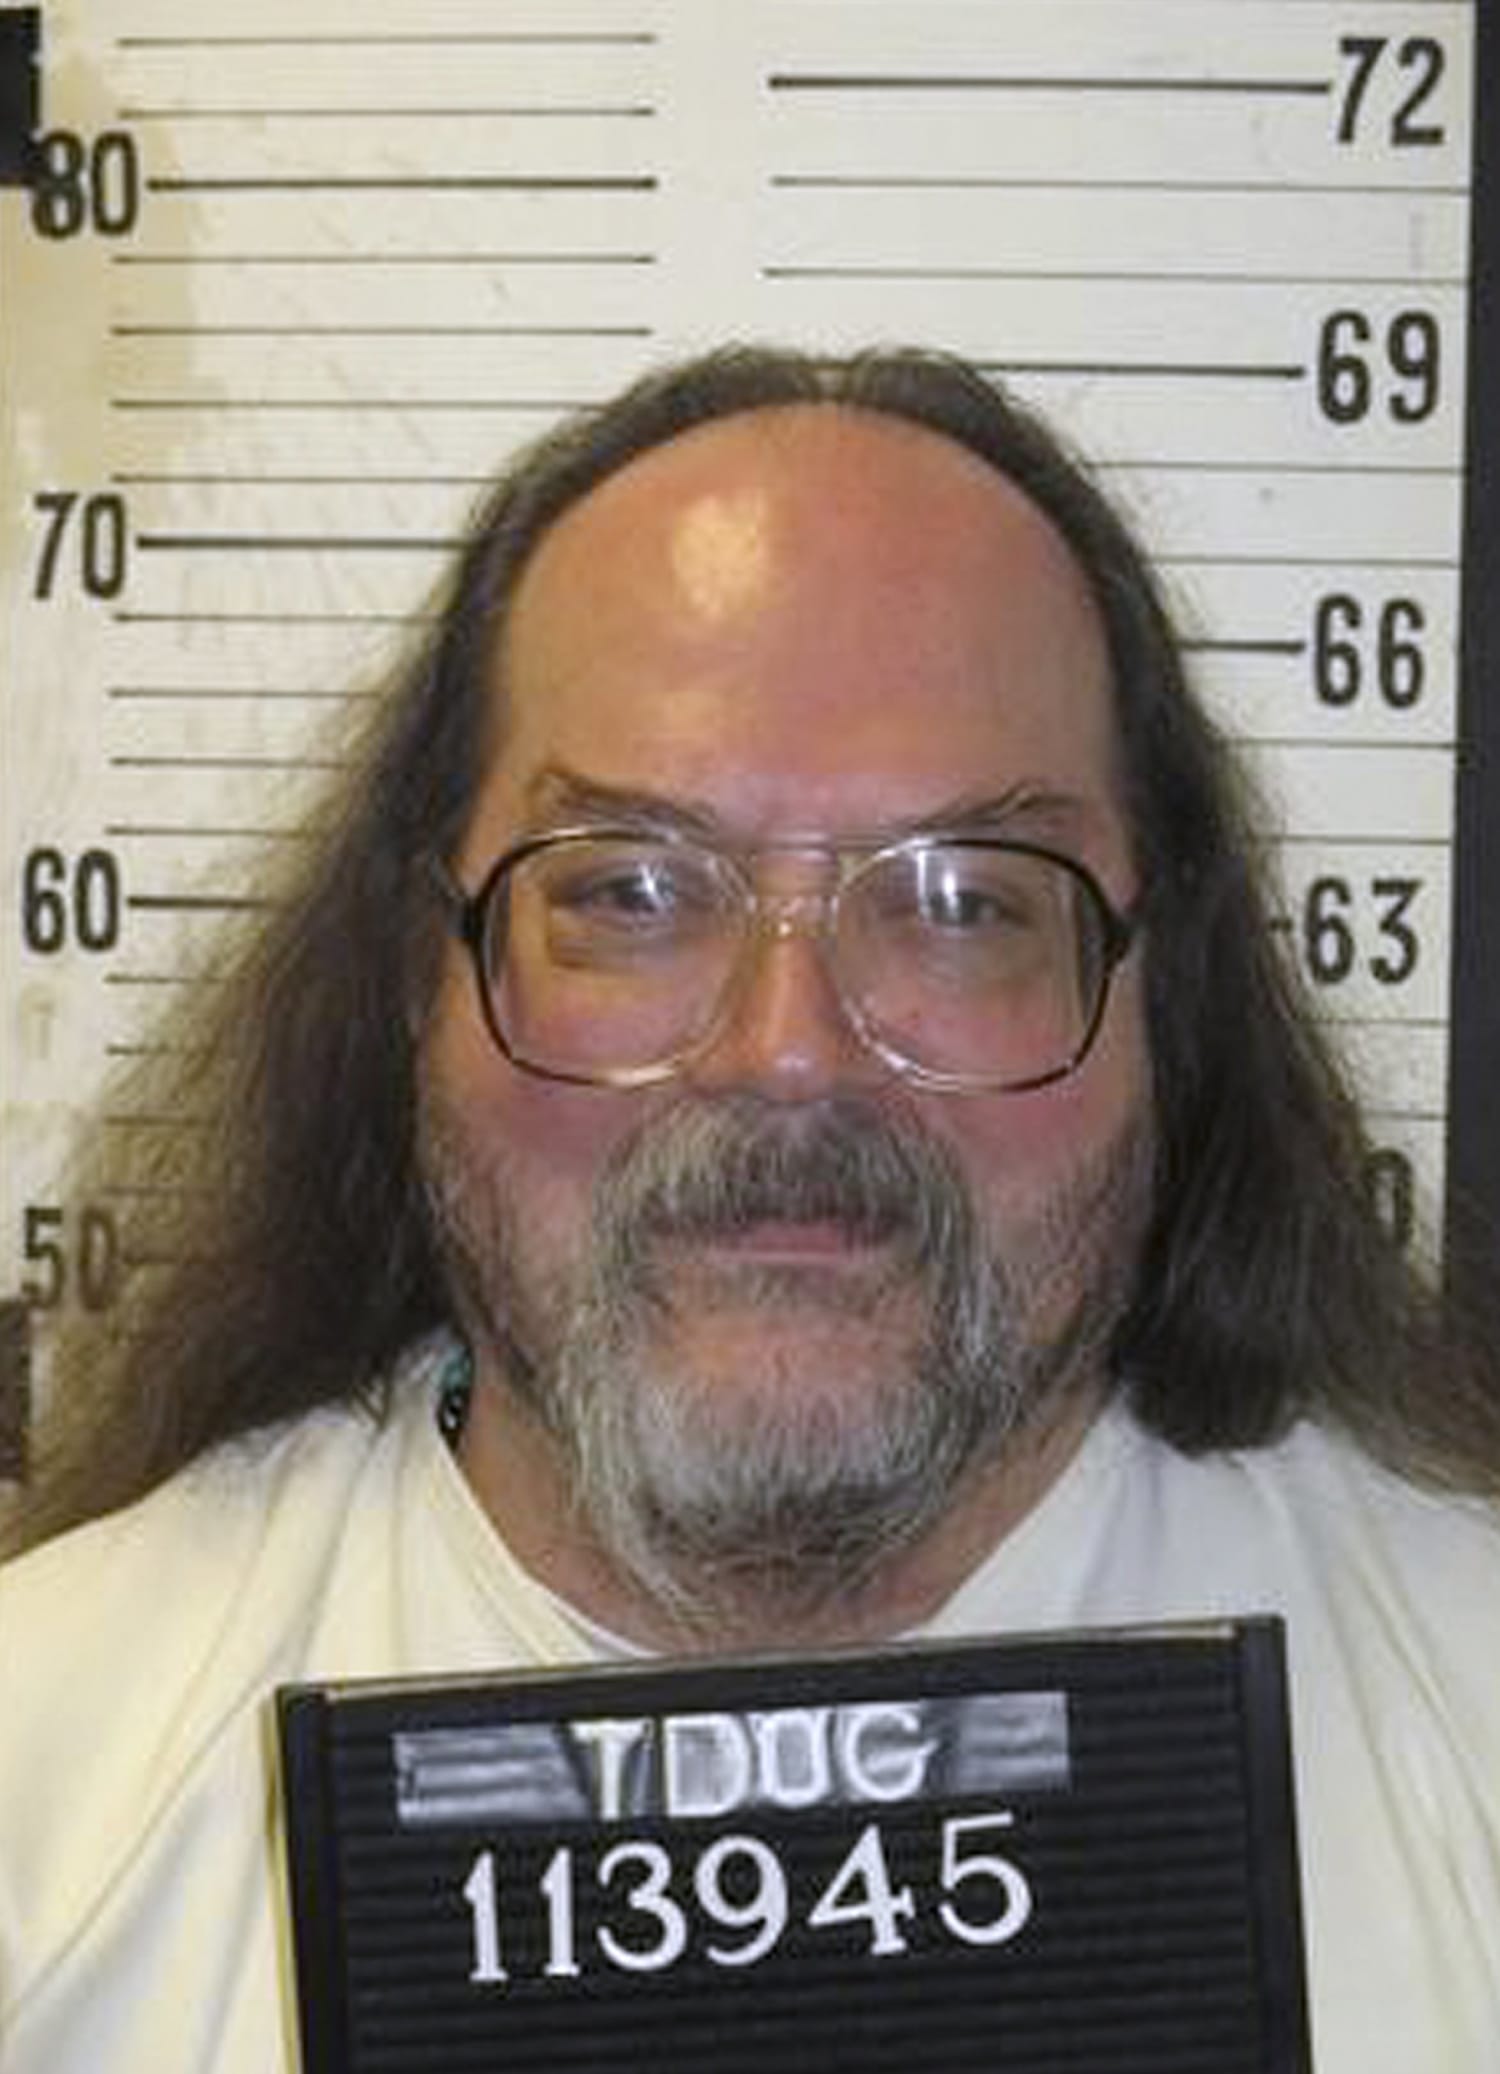 Tennessee Death Row Inmate Billy Ray Irick Apologizes Before Being Executed